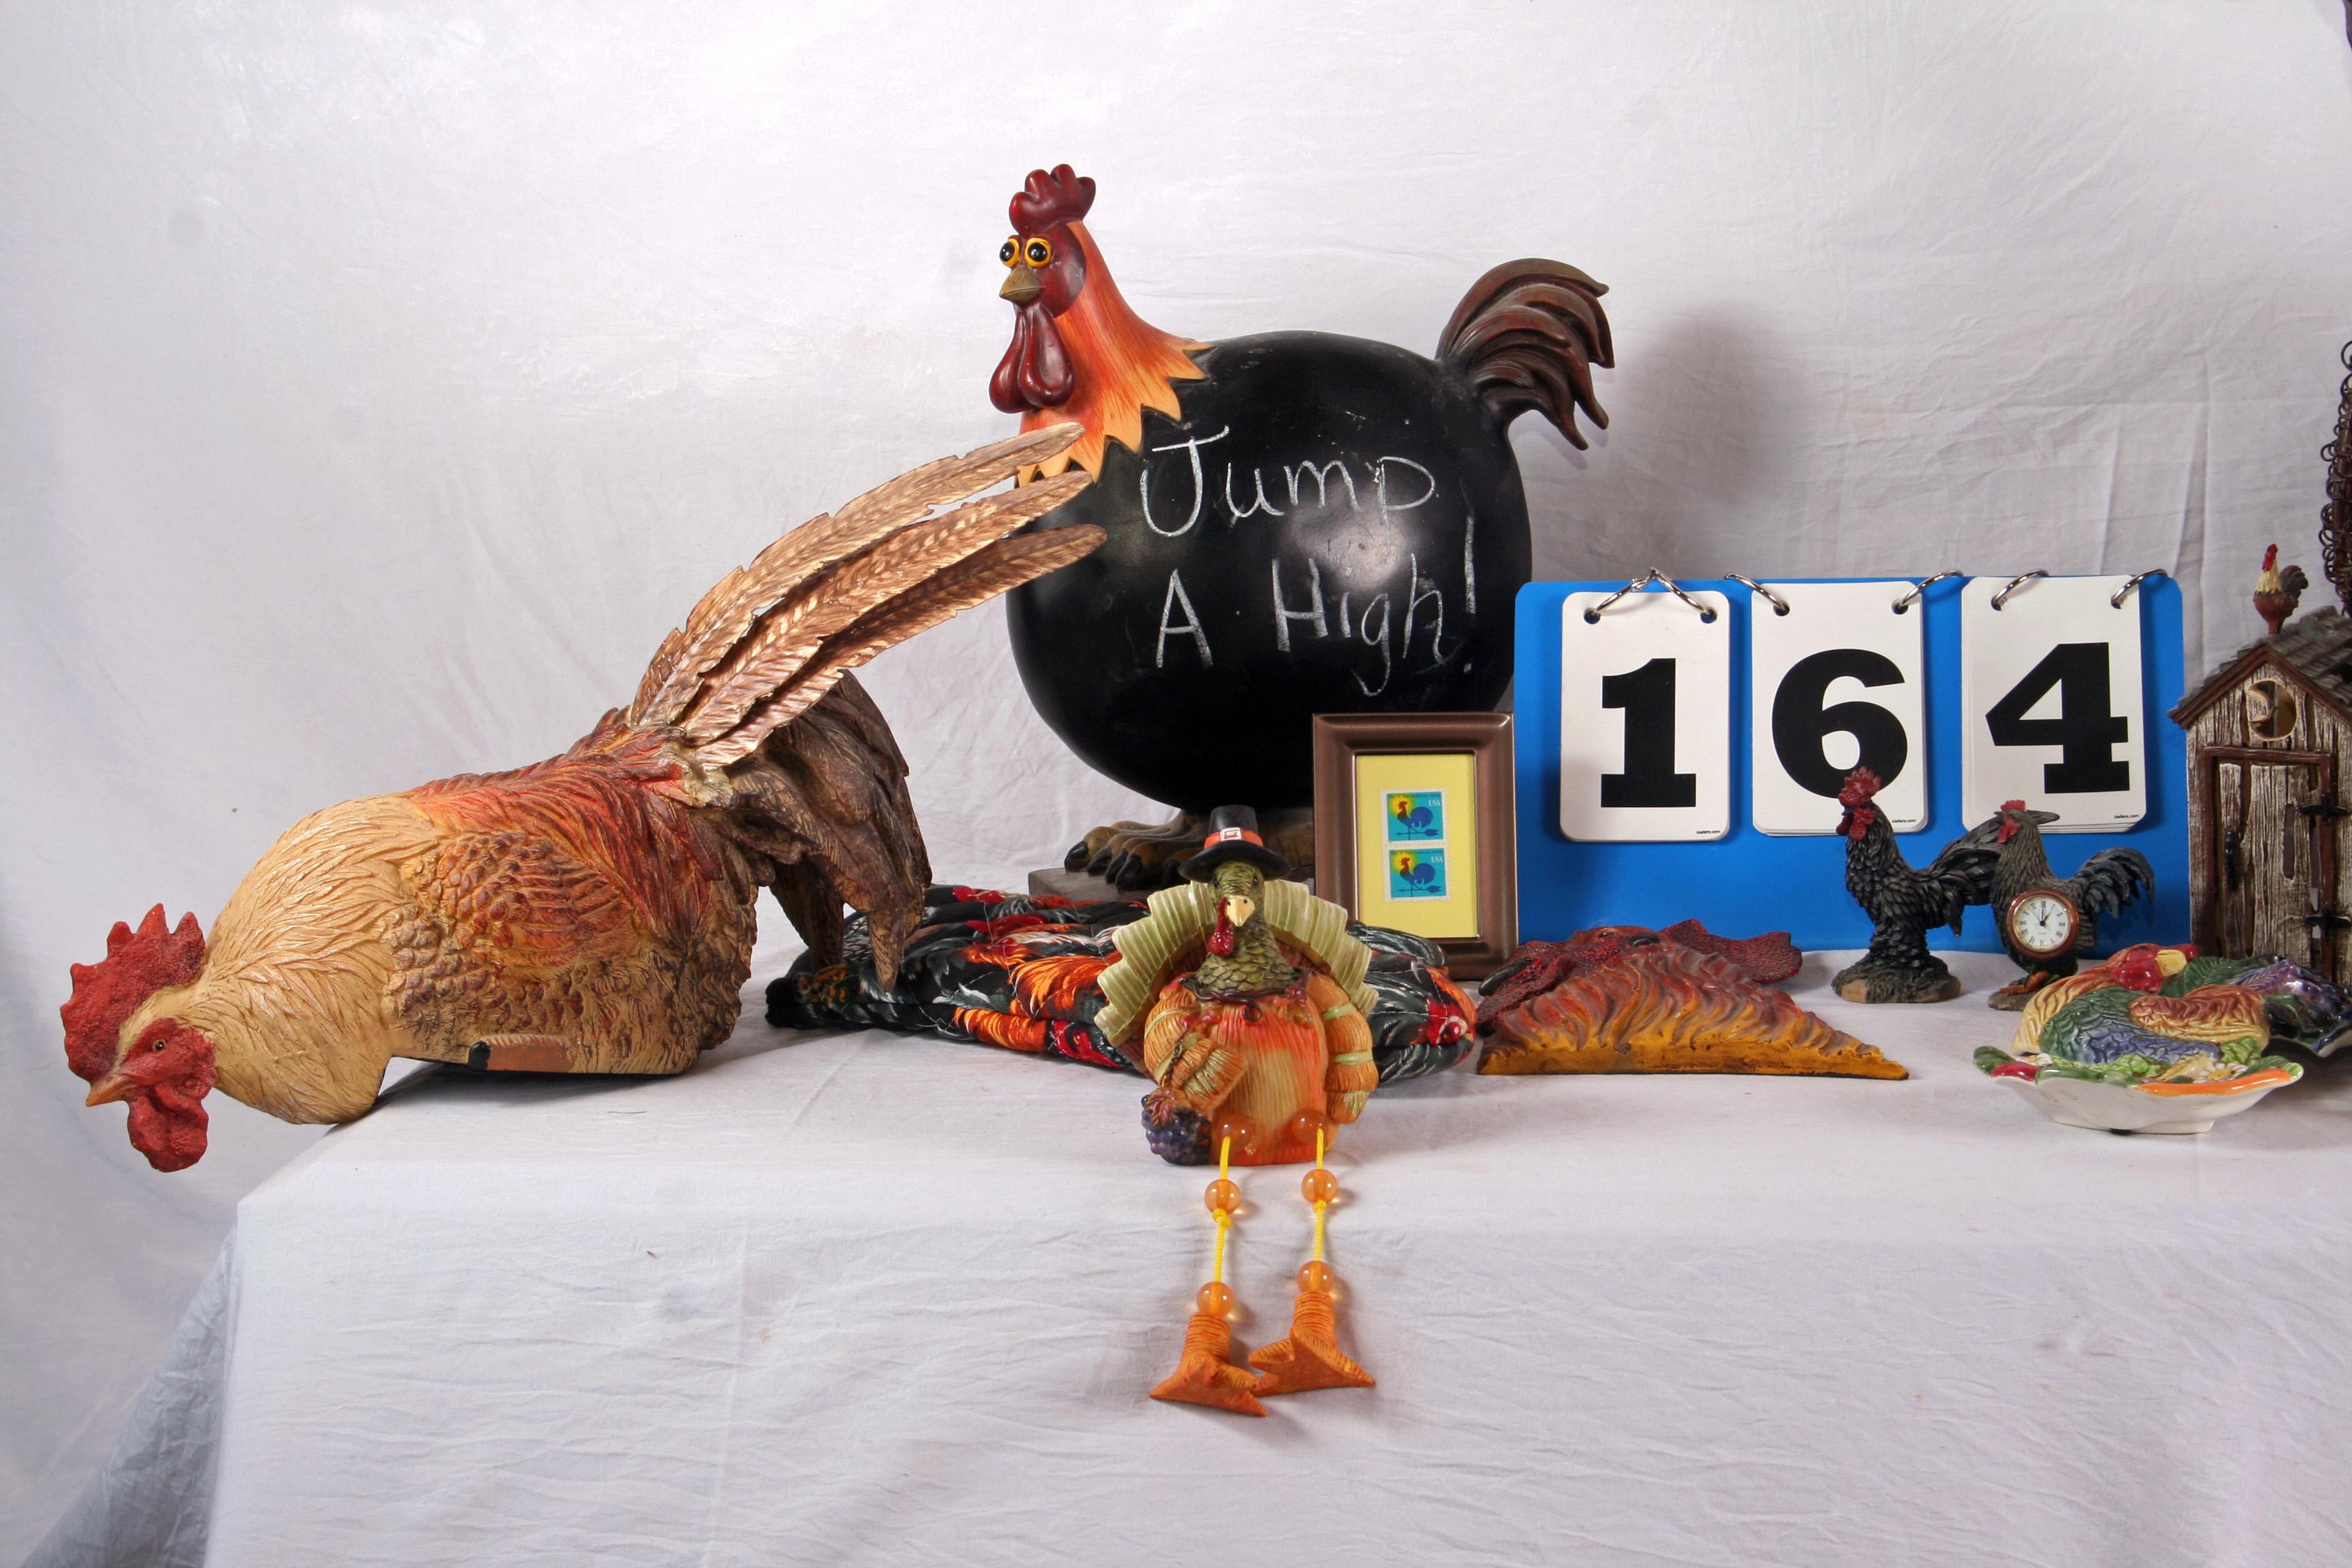 Hen & Rooster Collectibles 2